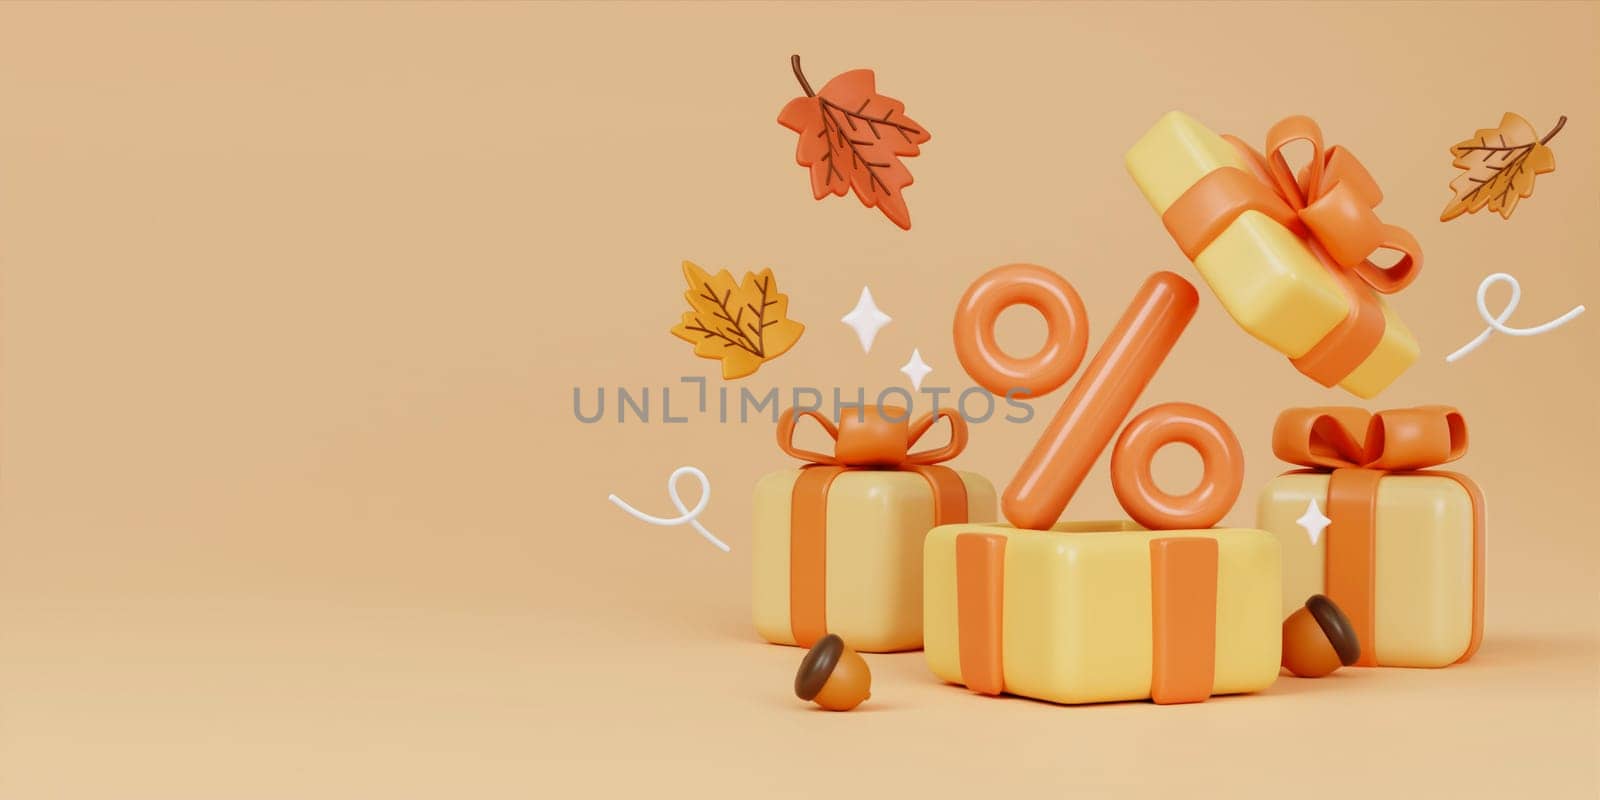 3d percent sign, walnut, gift boxes, leaves. 3d render for banner or poster design for autumn sale. copy space. delicate pastel colors. 3d rendering by meepiangraphic